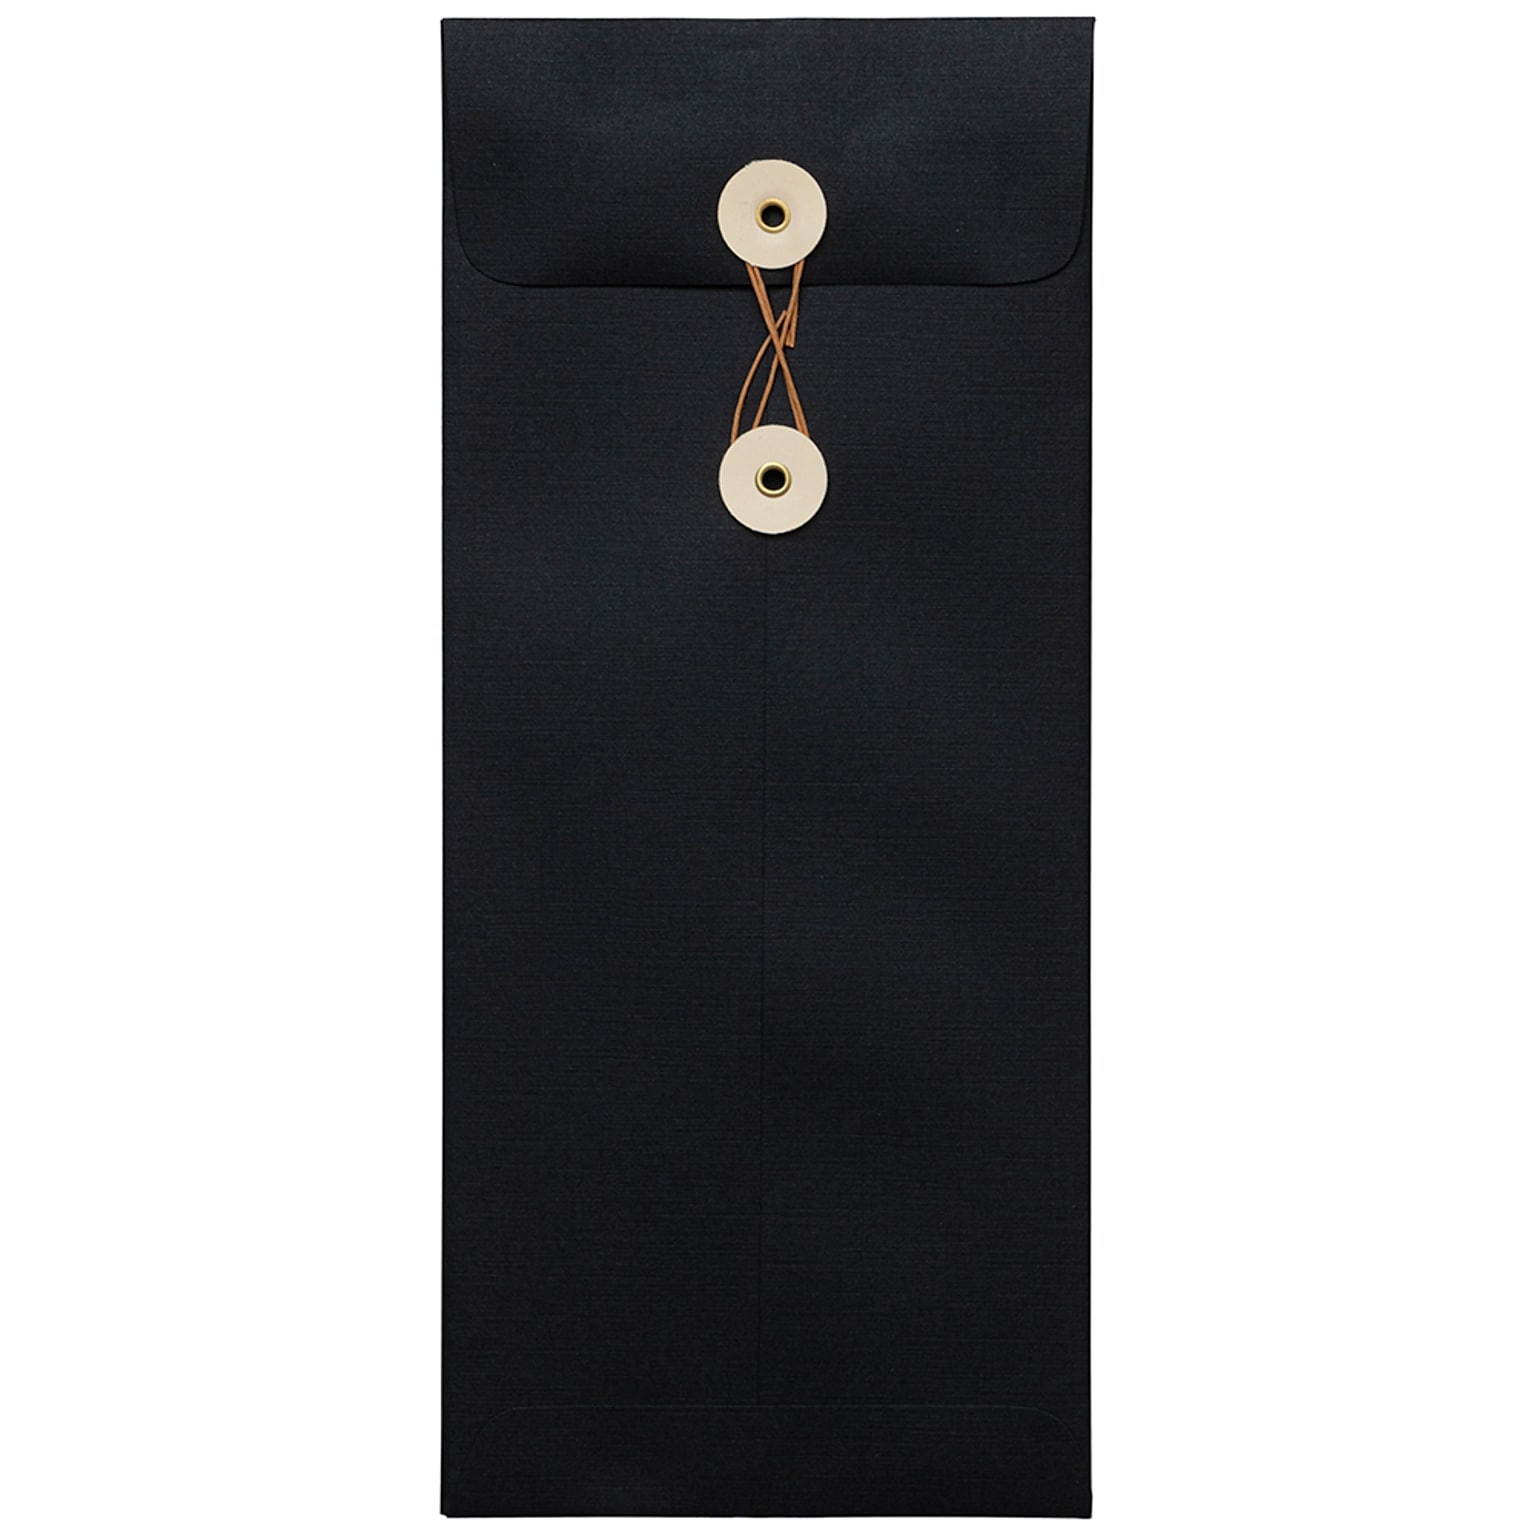 JAM Paper #10 Policy Business Envelopes with Button and String Closure, 4 1/8 x 9 1/2, Black Linen, 50/Pack (1261601I)